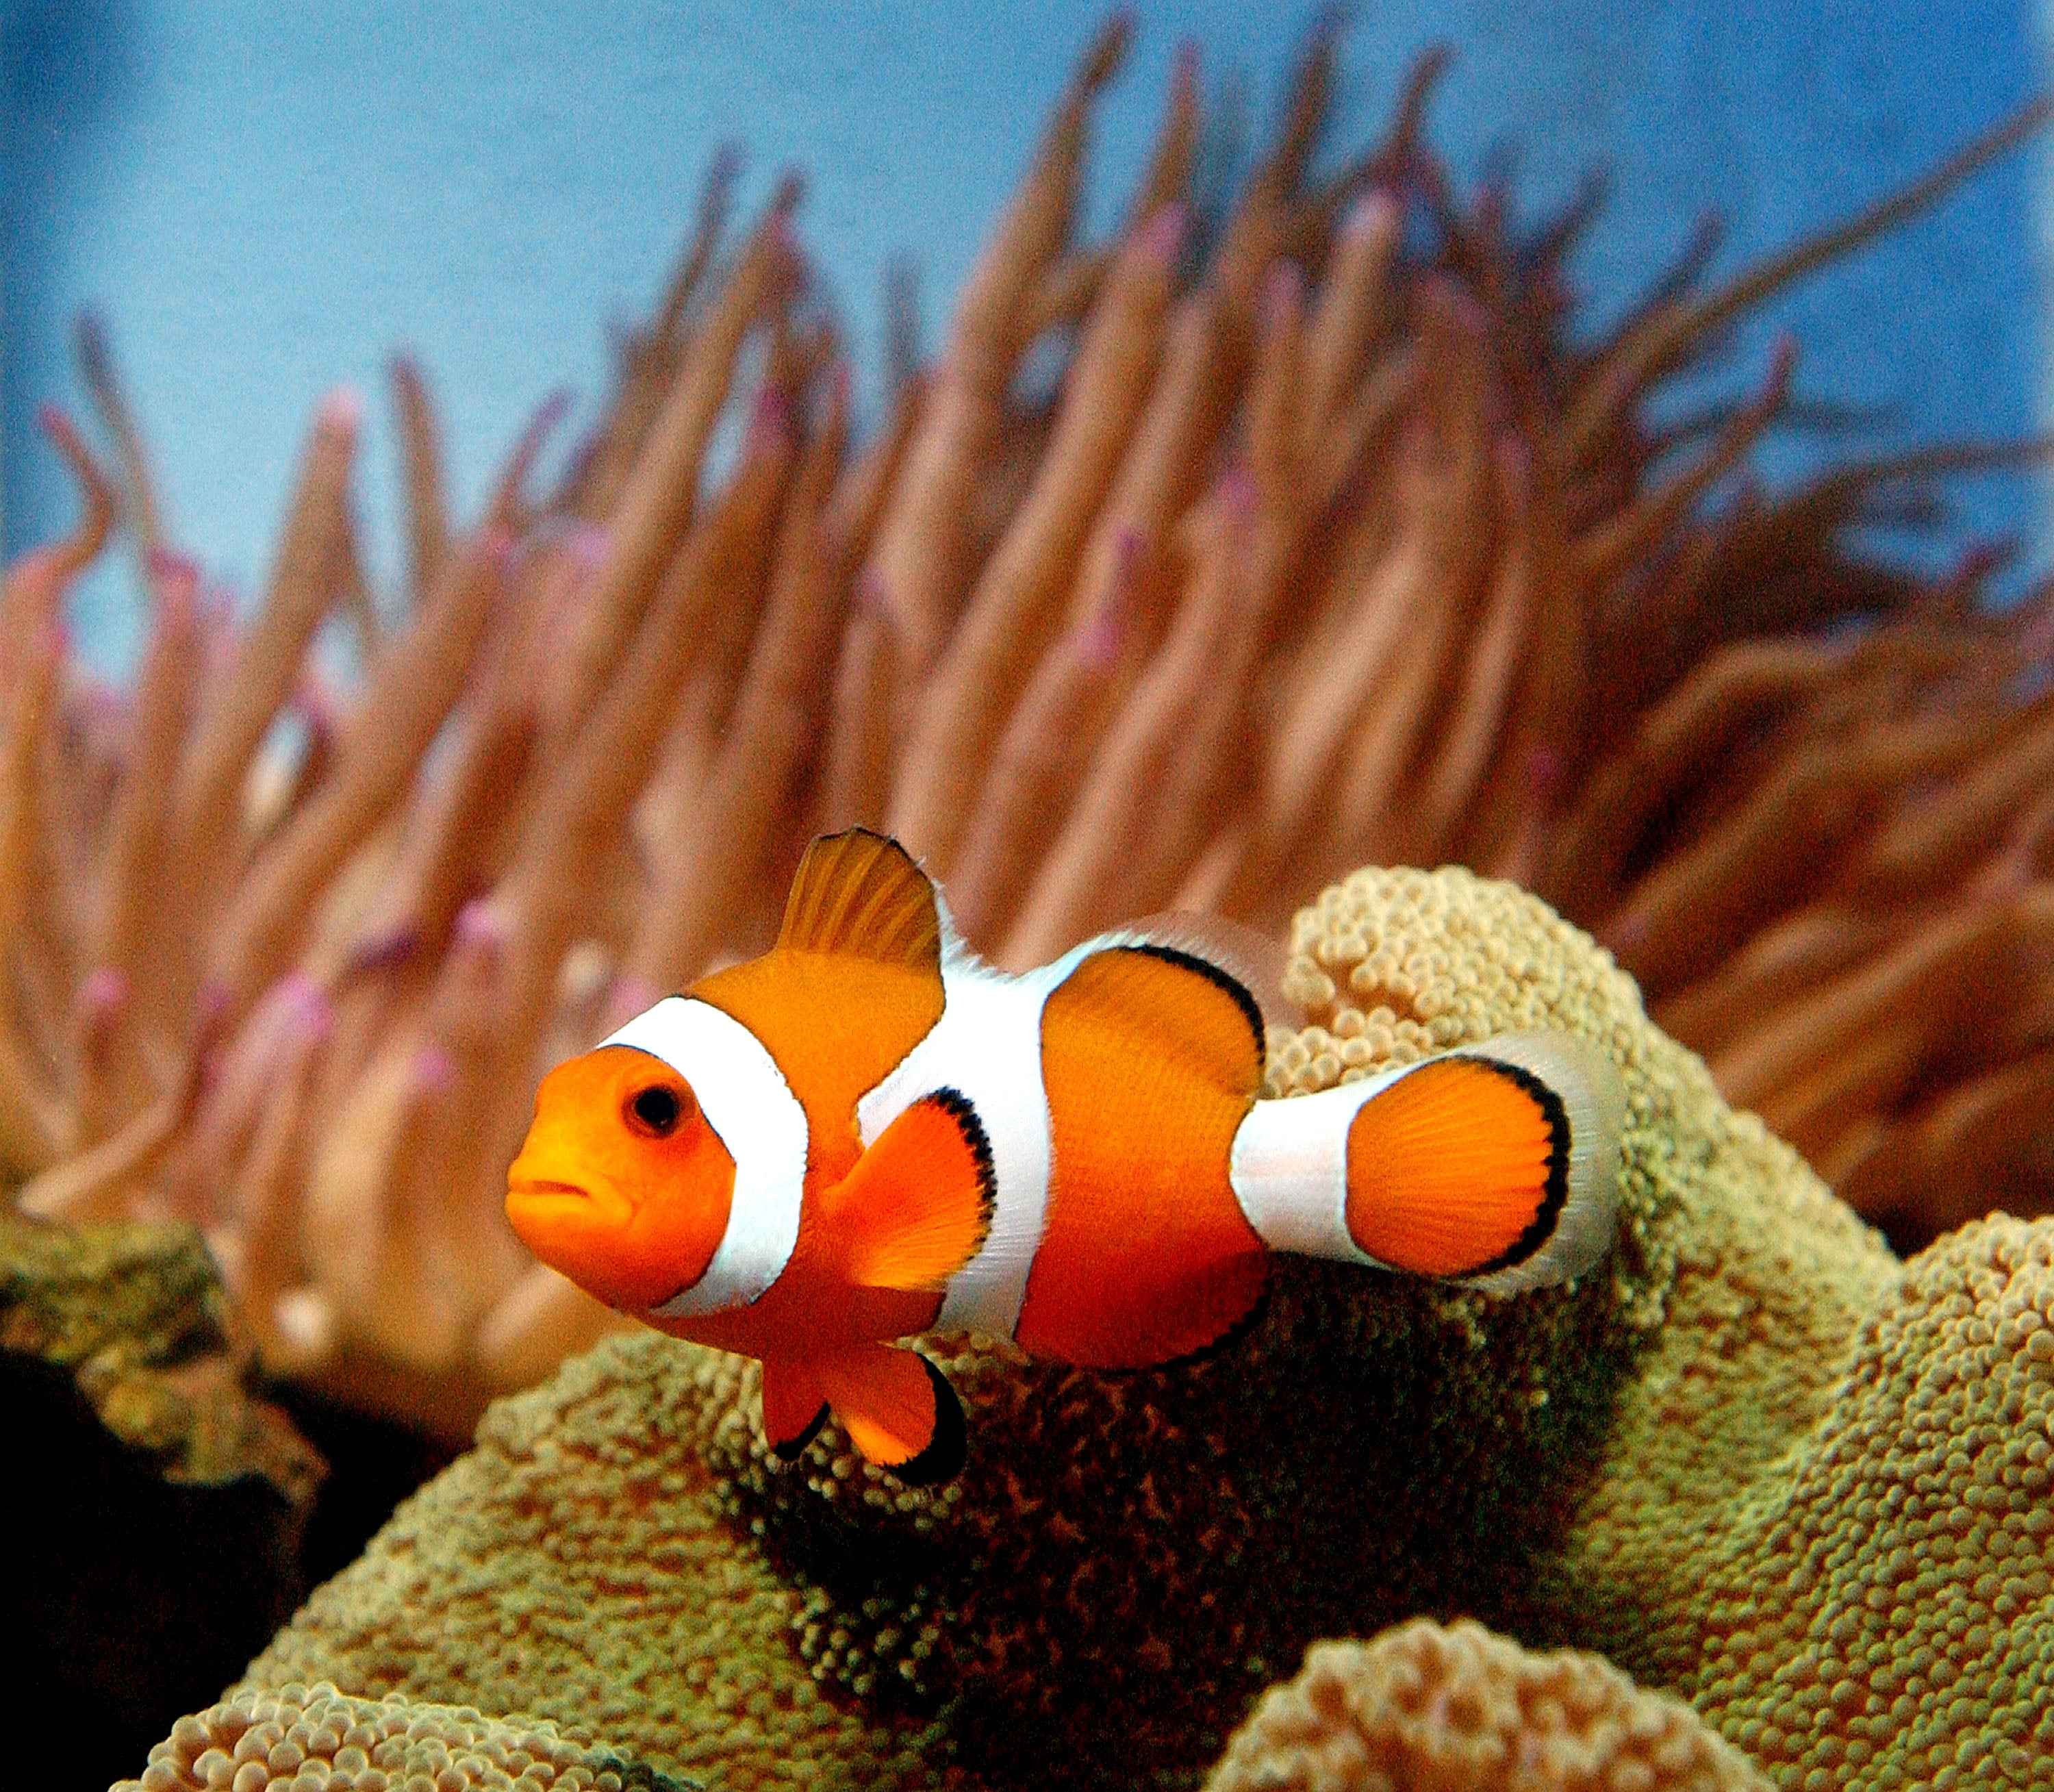 The study focused on the effects of sediment on the gills of larval clownfish